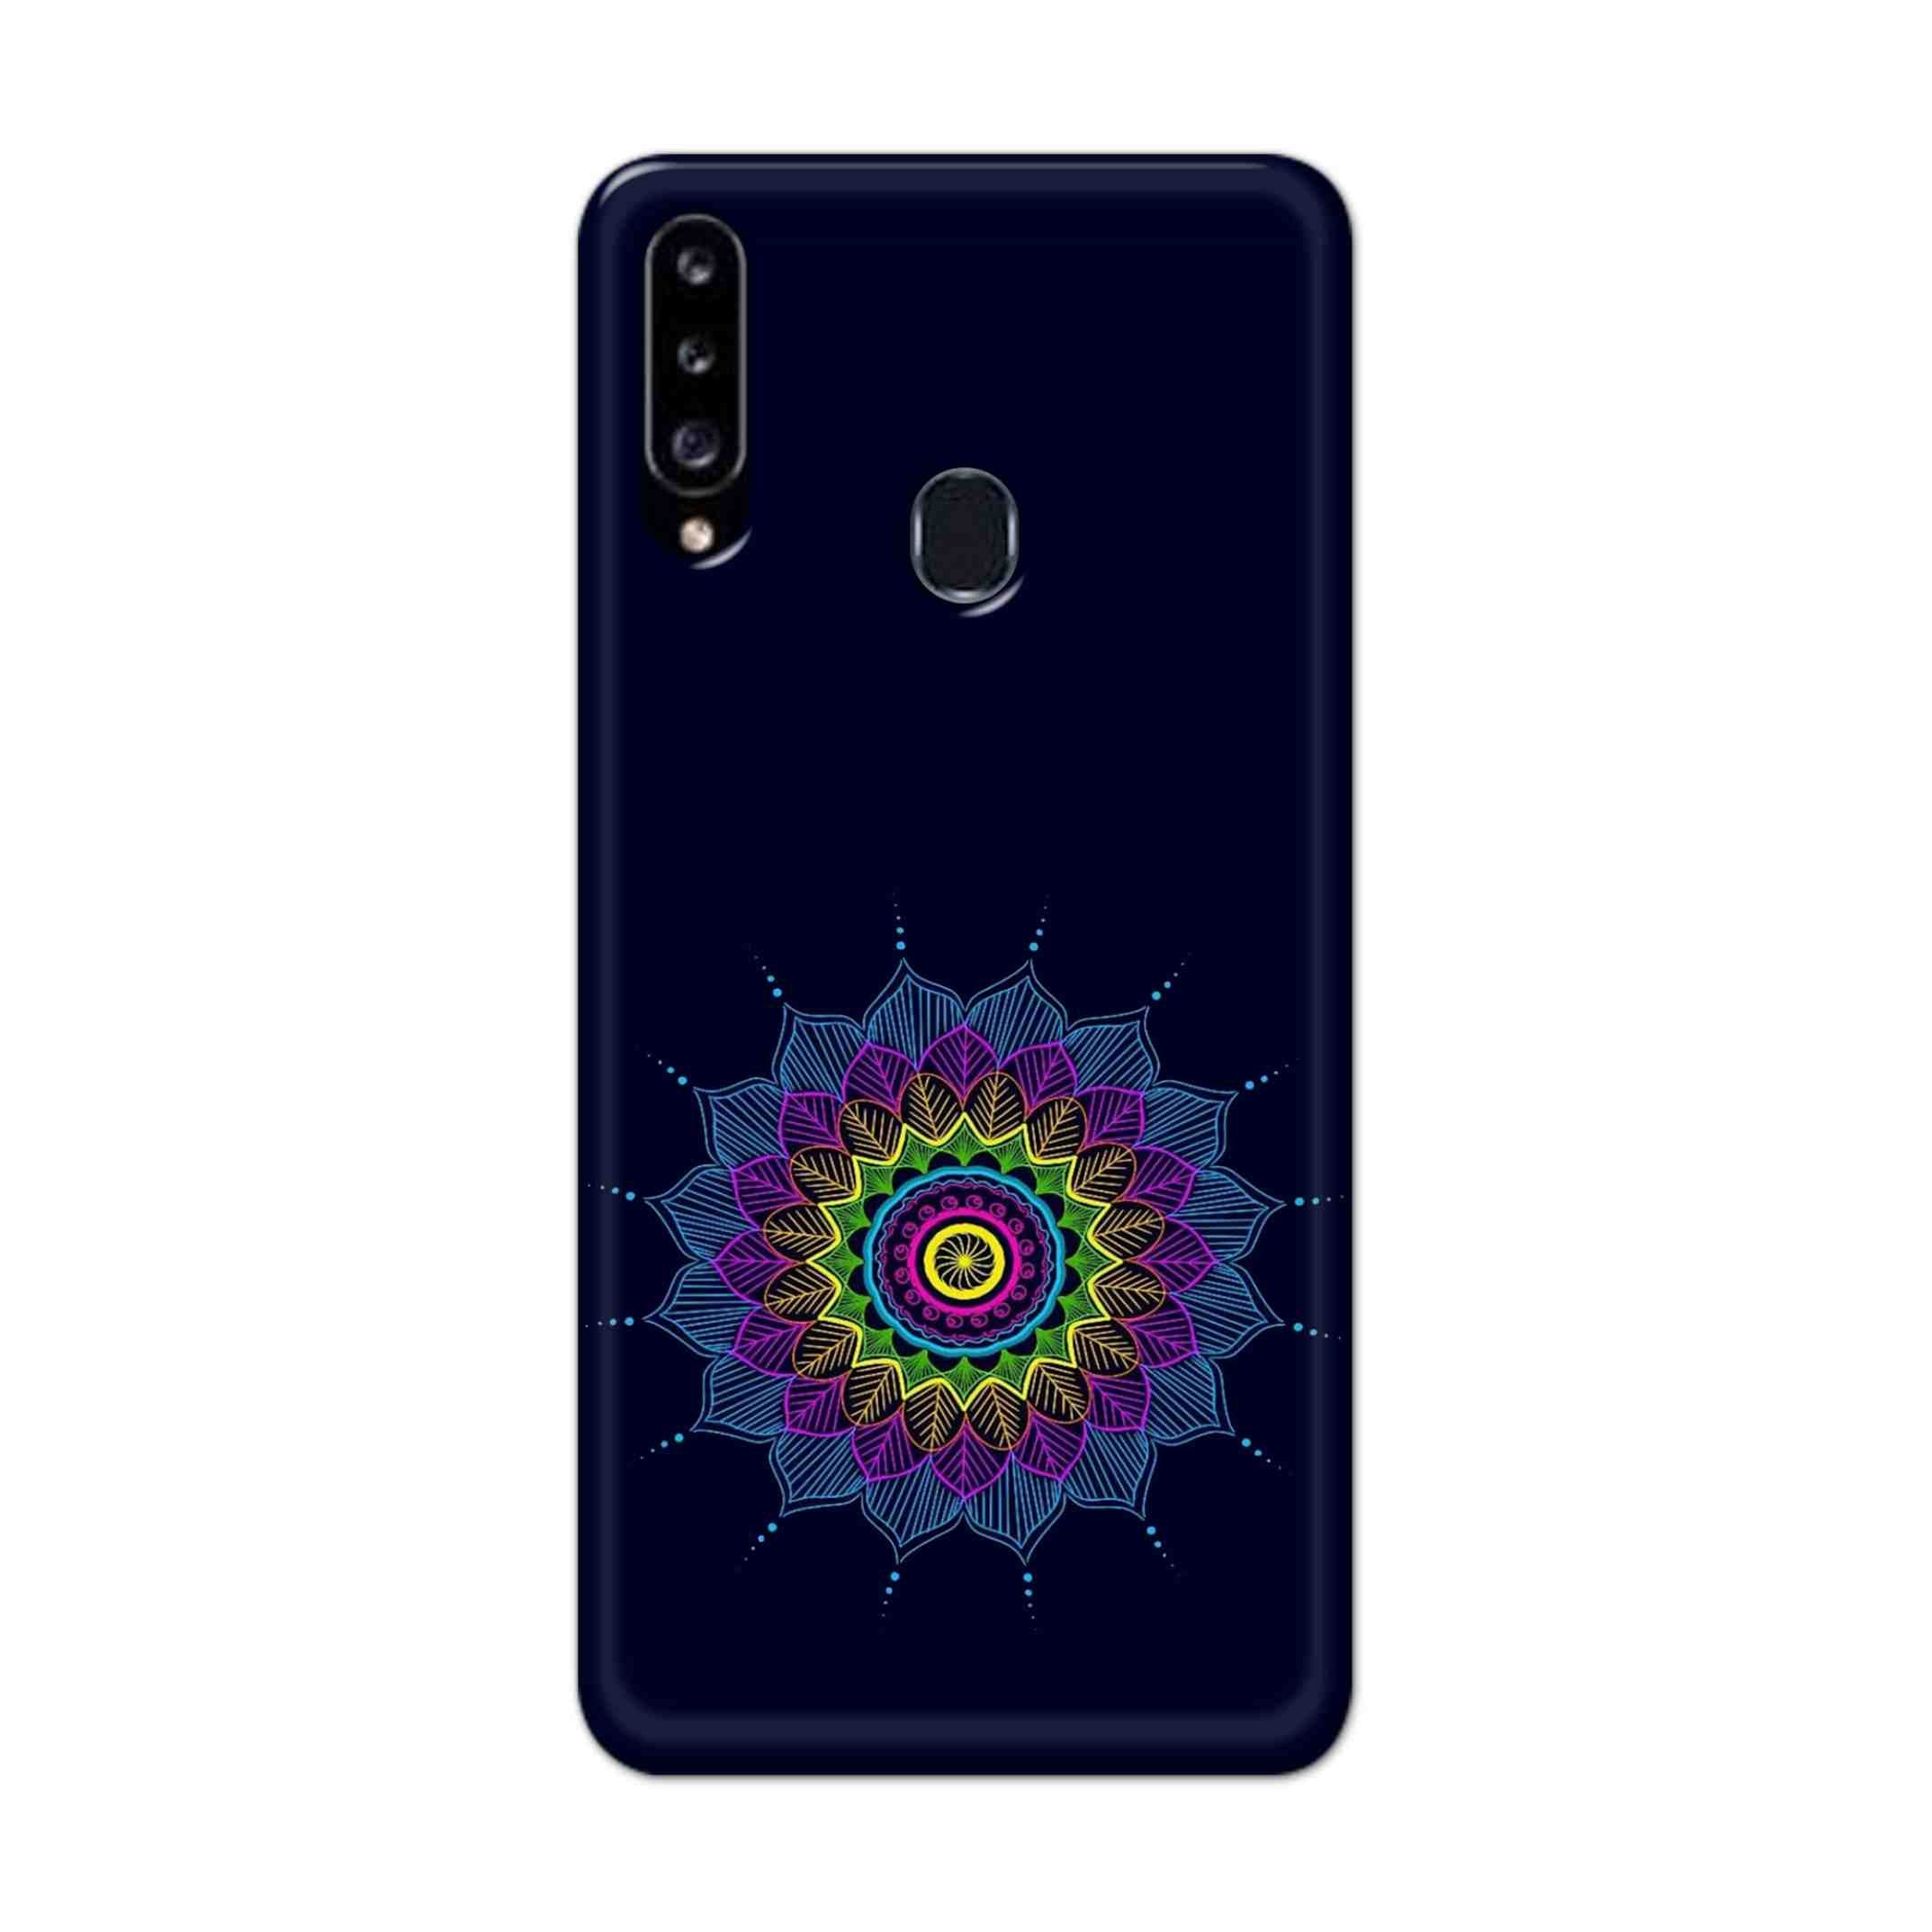 Buy Jung And Mandalas Hard Back Mobile Phone Case Cover For Samsung Galaxy A21 Online